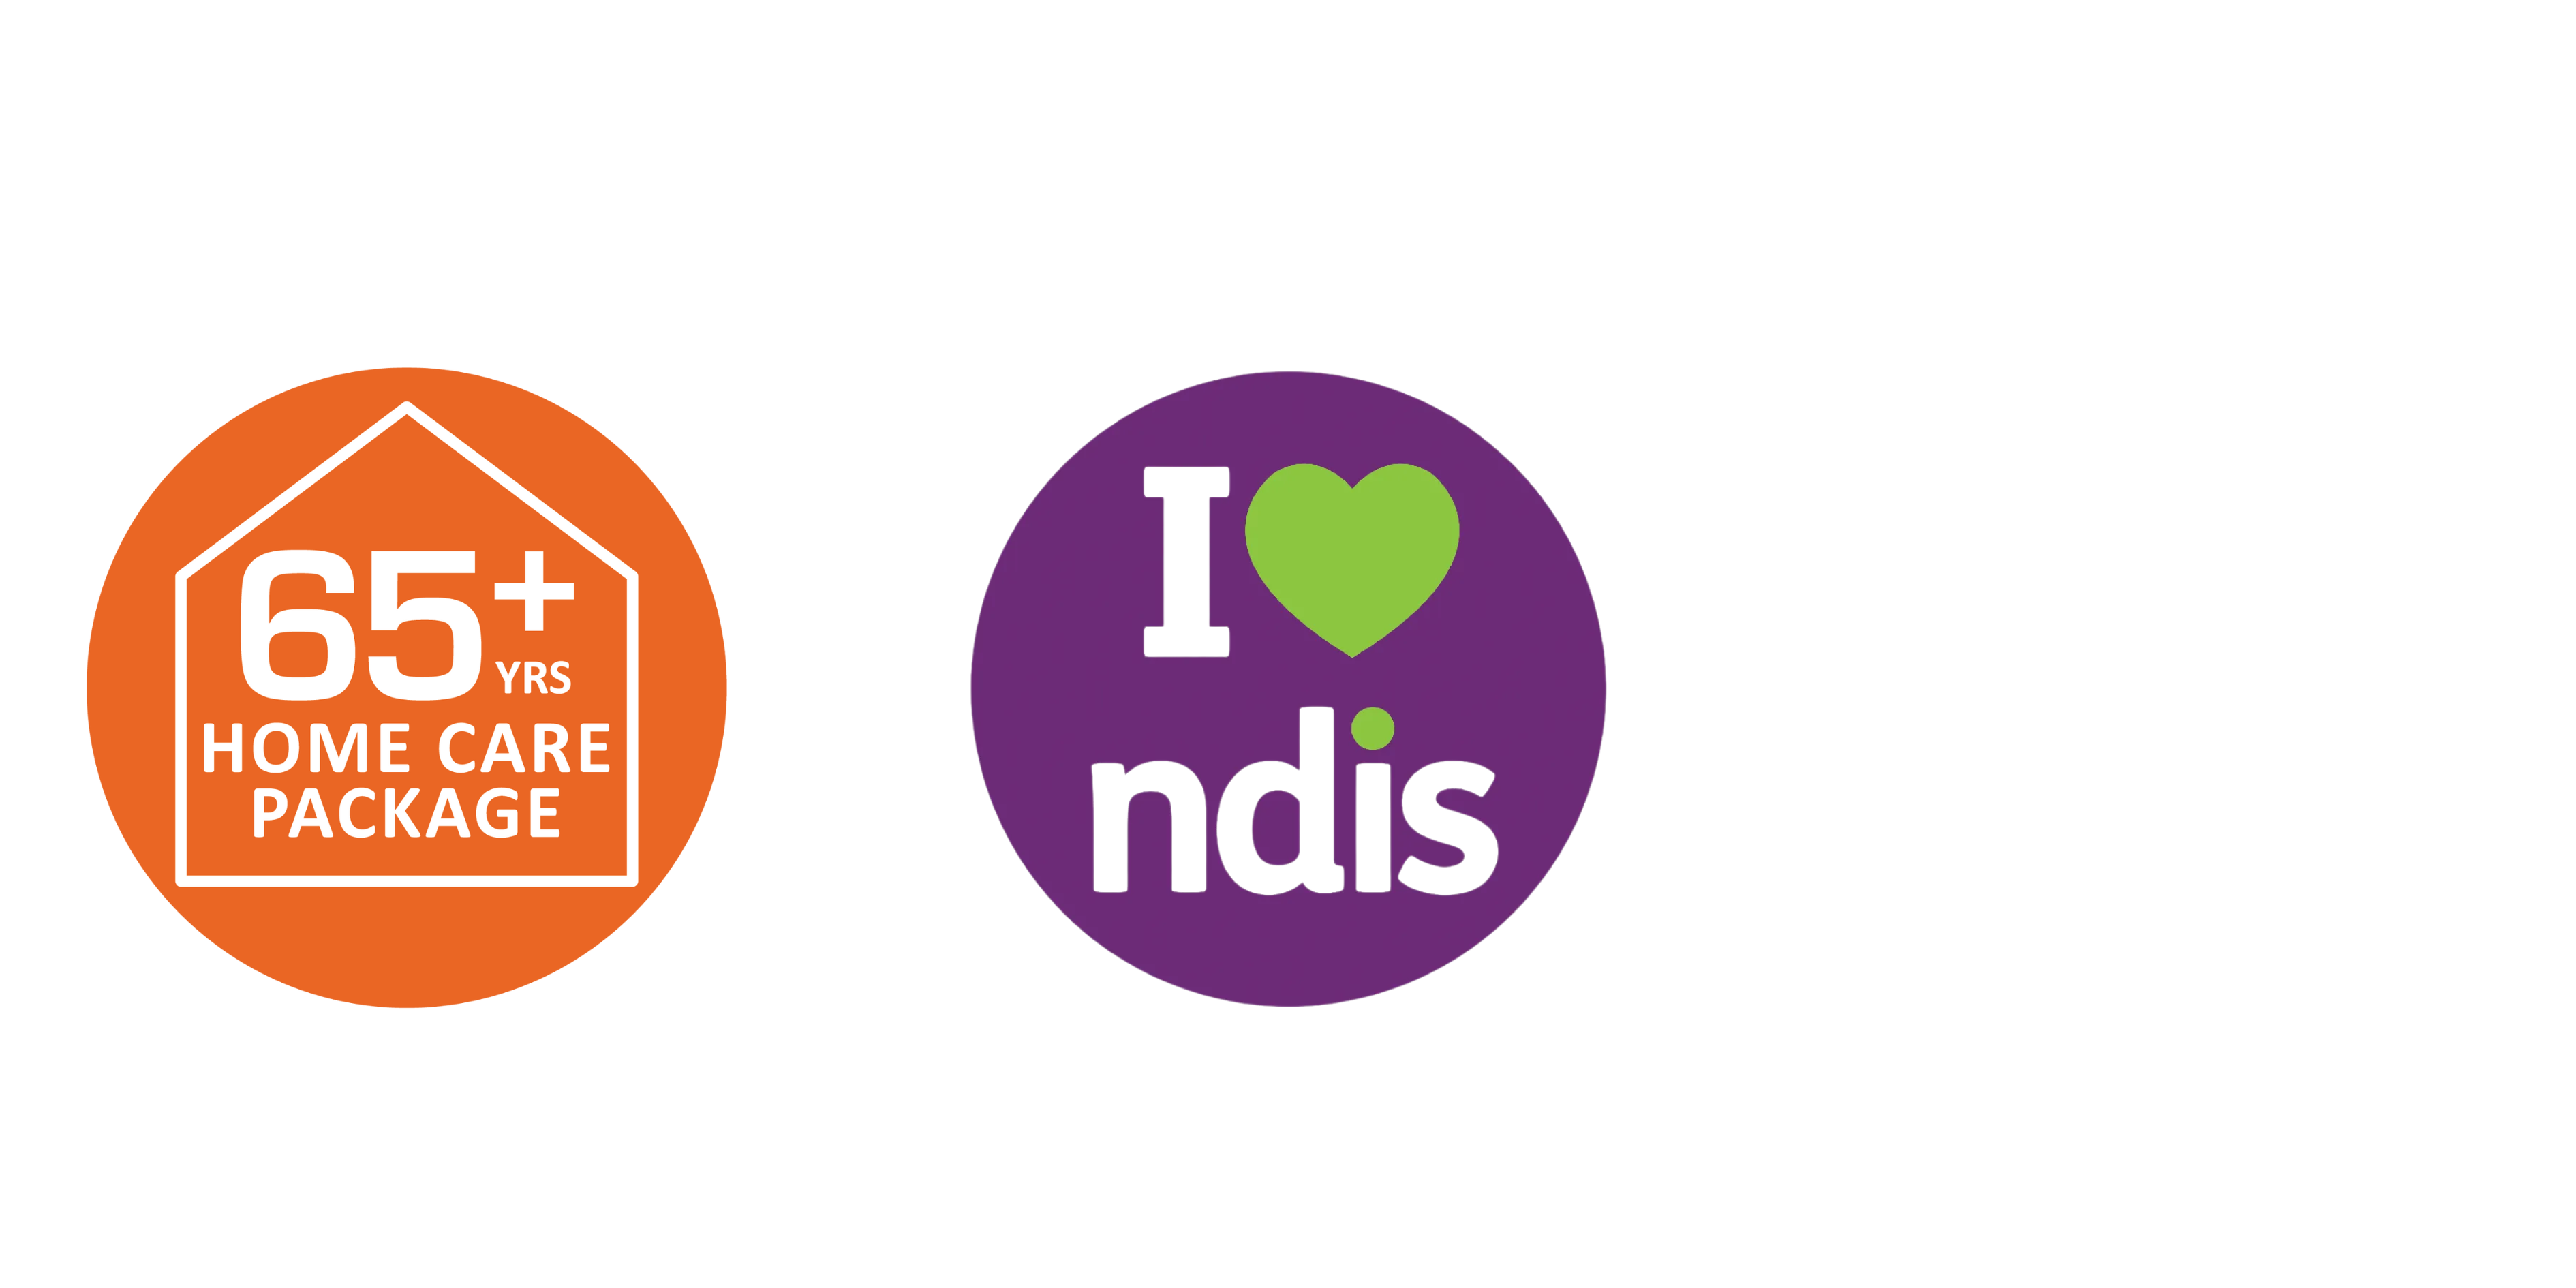 Elderly Home Care and NDIS Logos